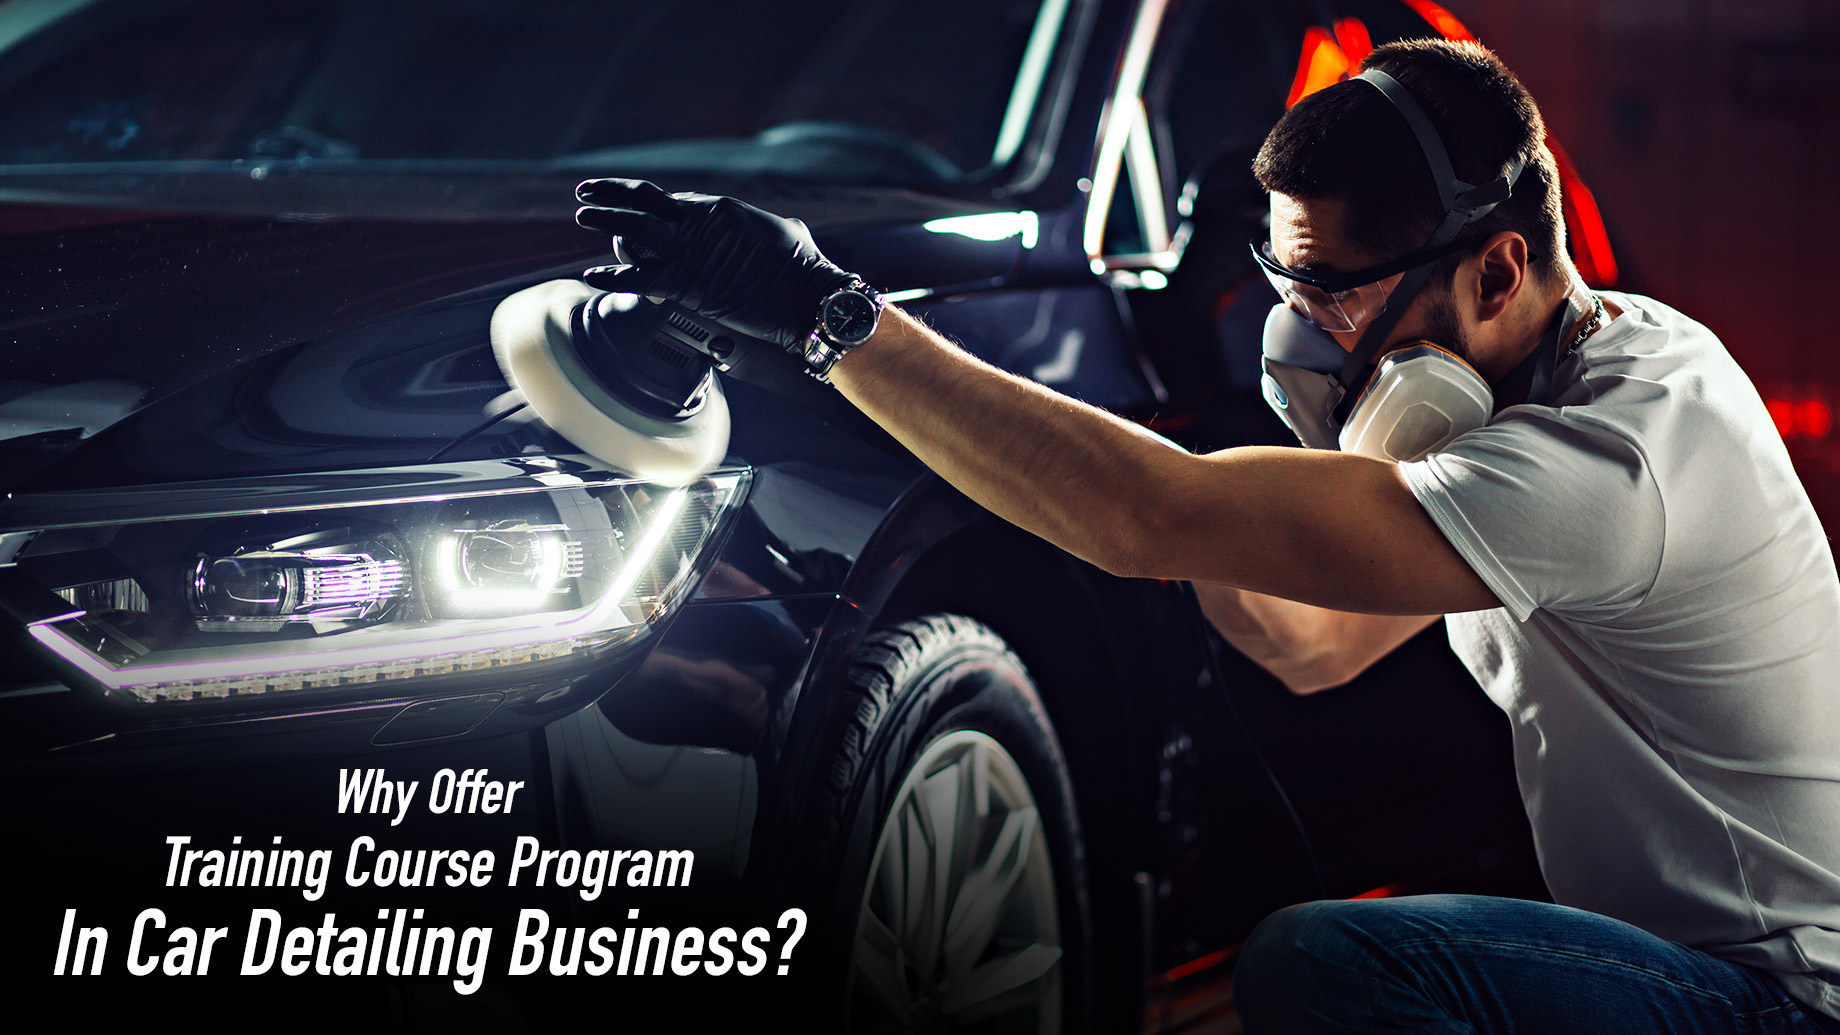 Why Offer Training Course Program In Car Detailing Business?